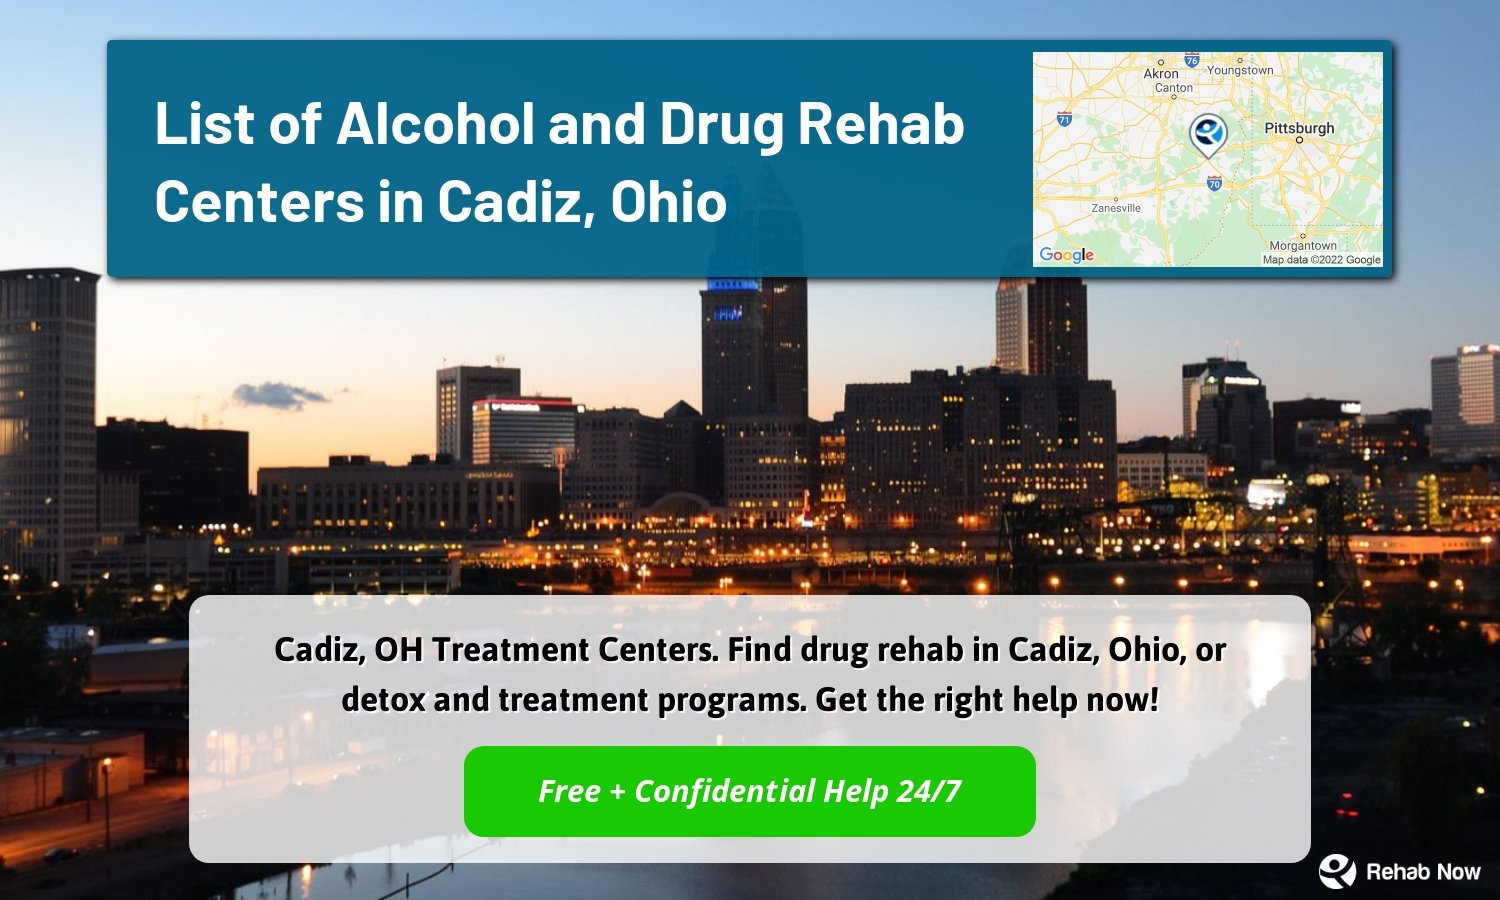 Cadiz, OH Treatment Centers. Find drug rehab in Cadiz, Ohio, or detox and treatment programs. Get the right help now!